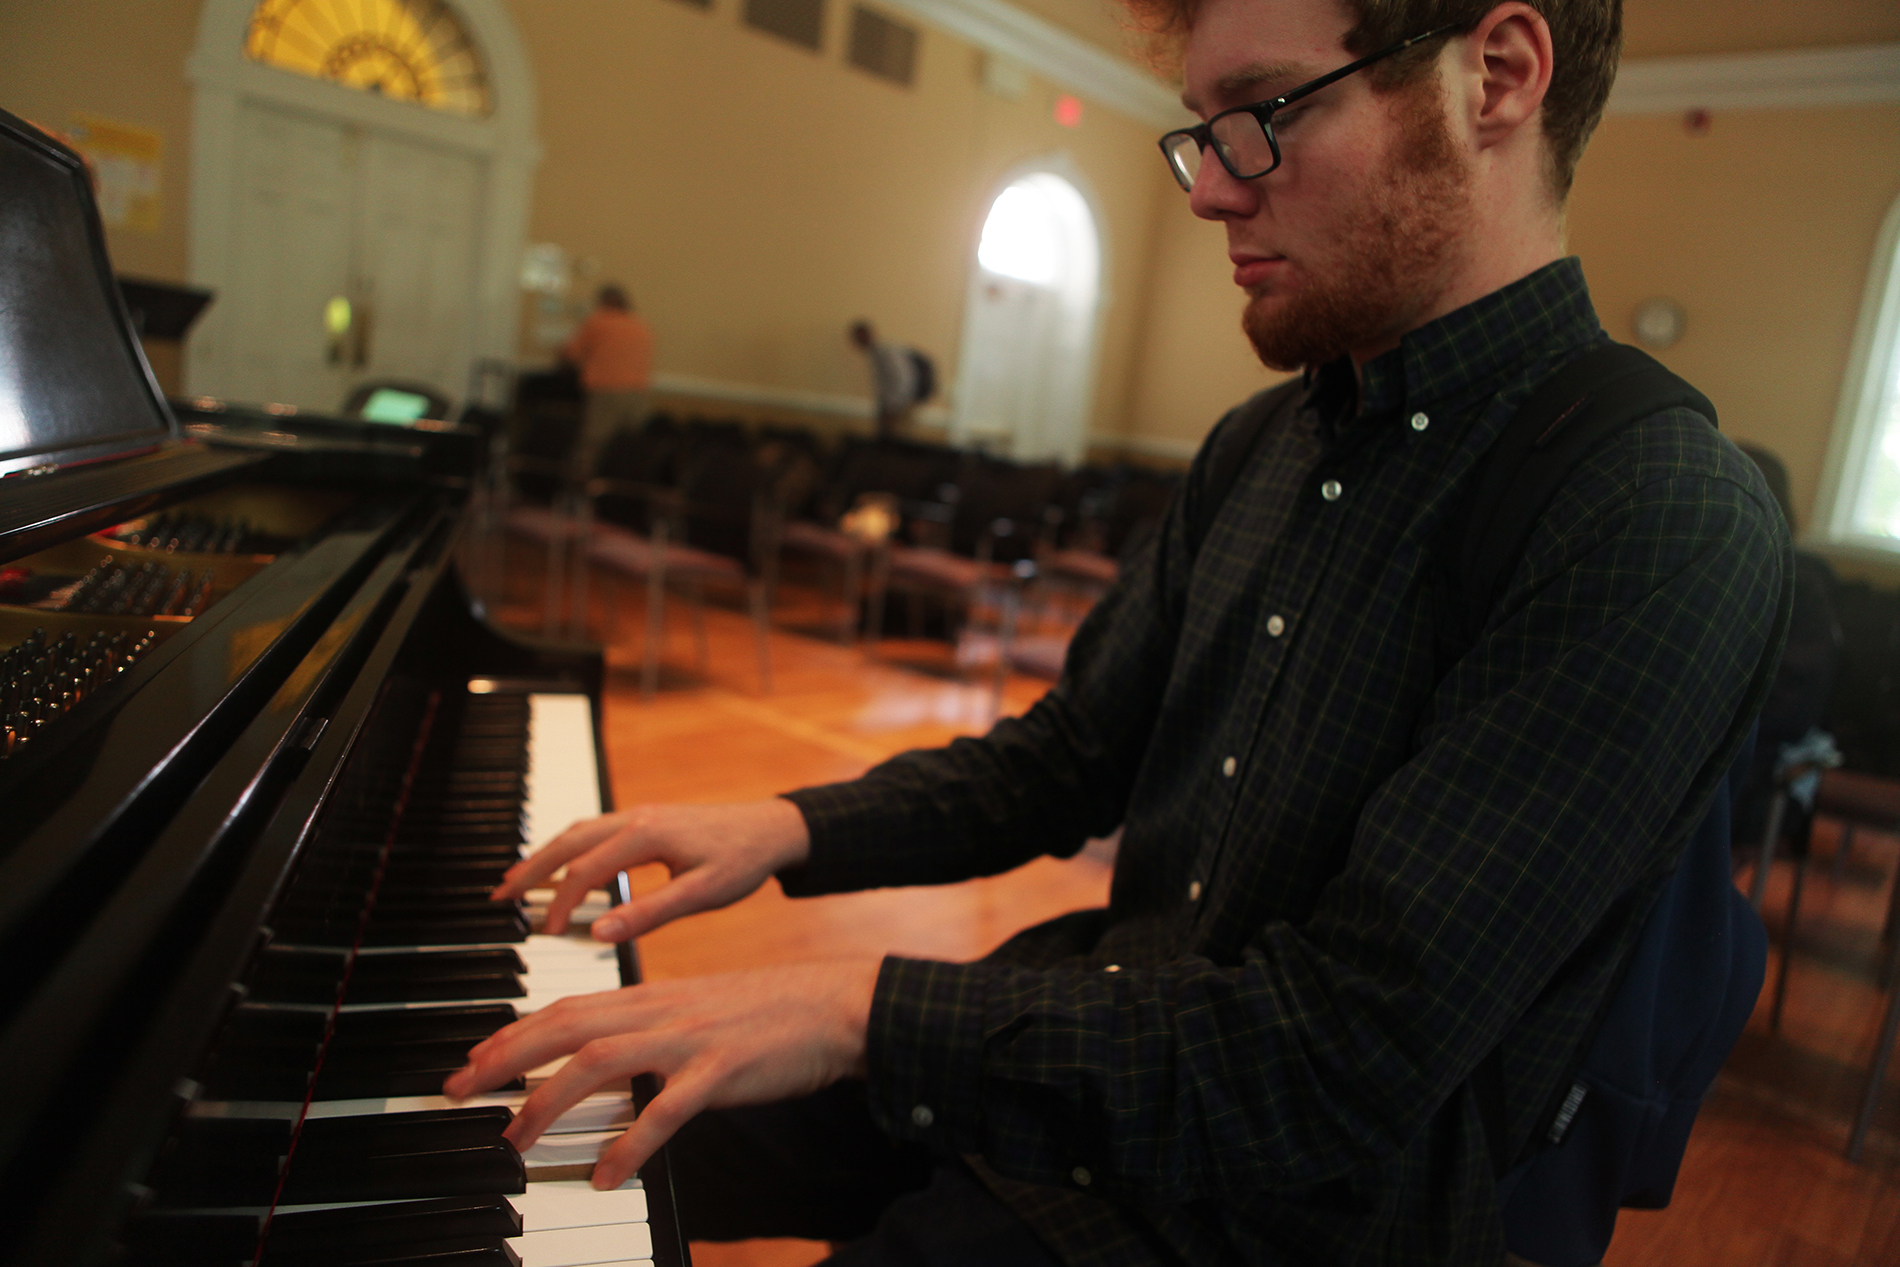 A young man plays the piano